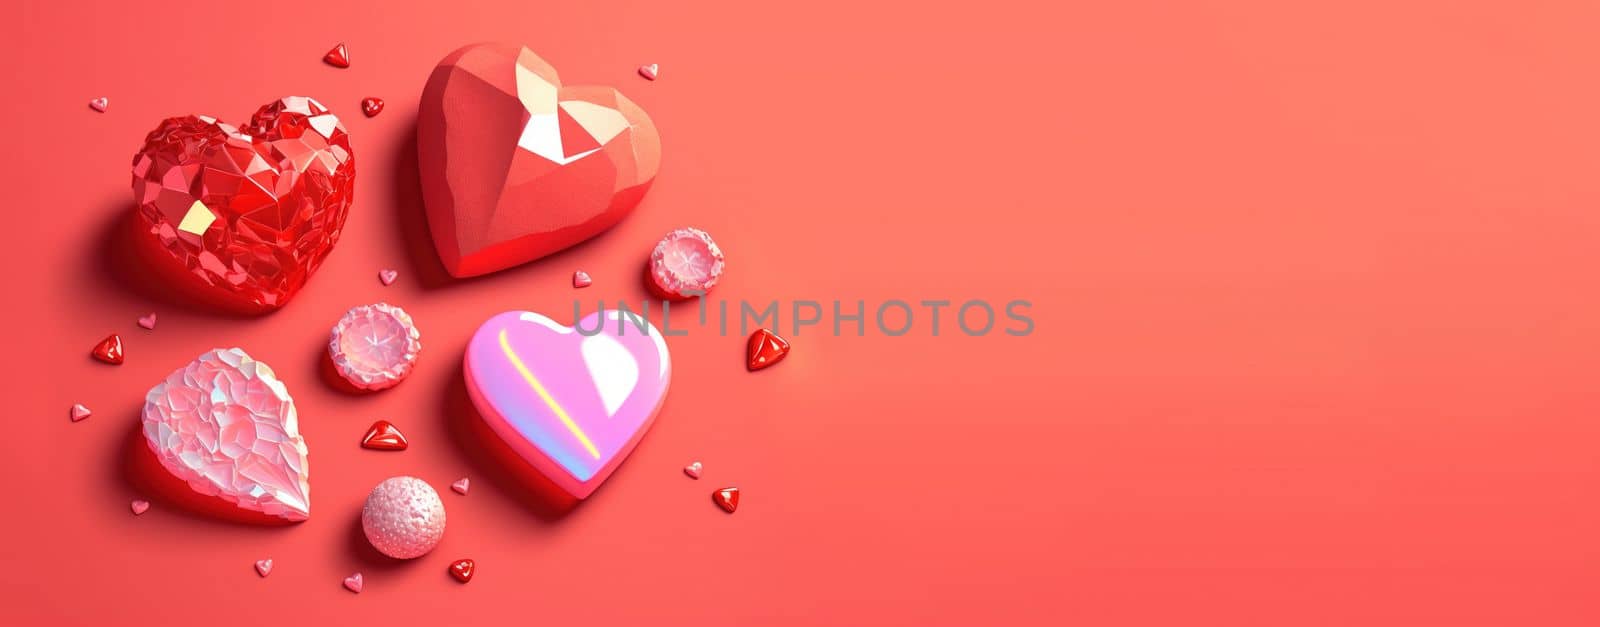 Valentine's Day 3D Illustration Design Heart Diamond and Crystal Themed Banner and Background